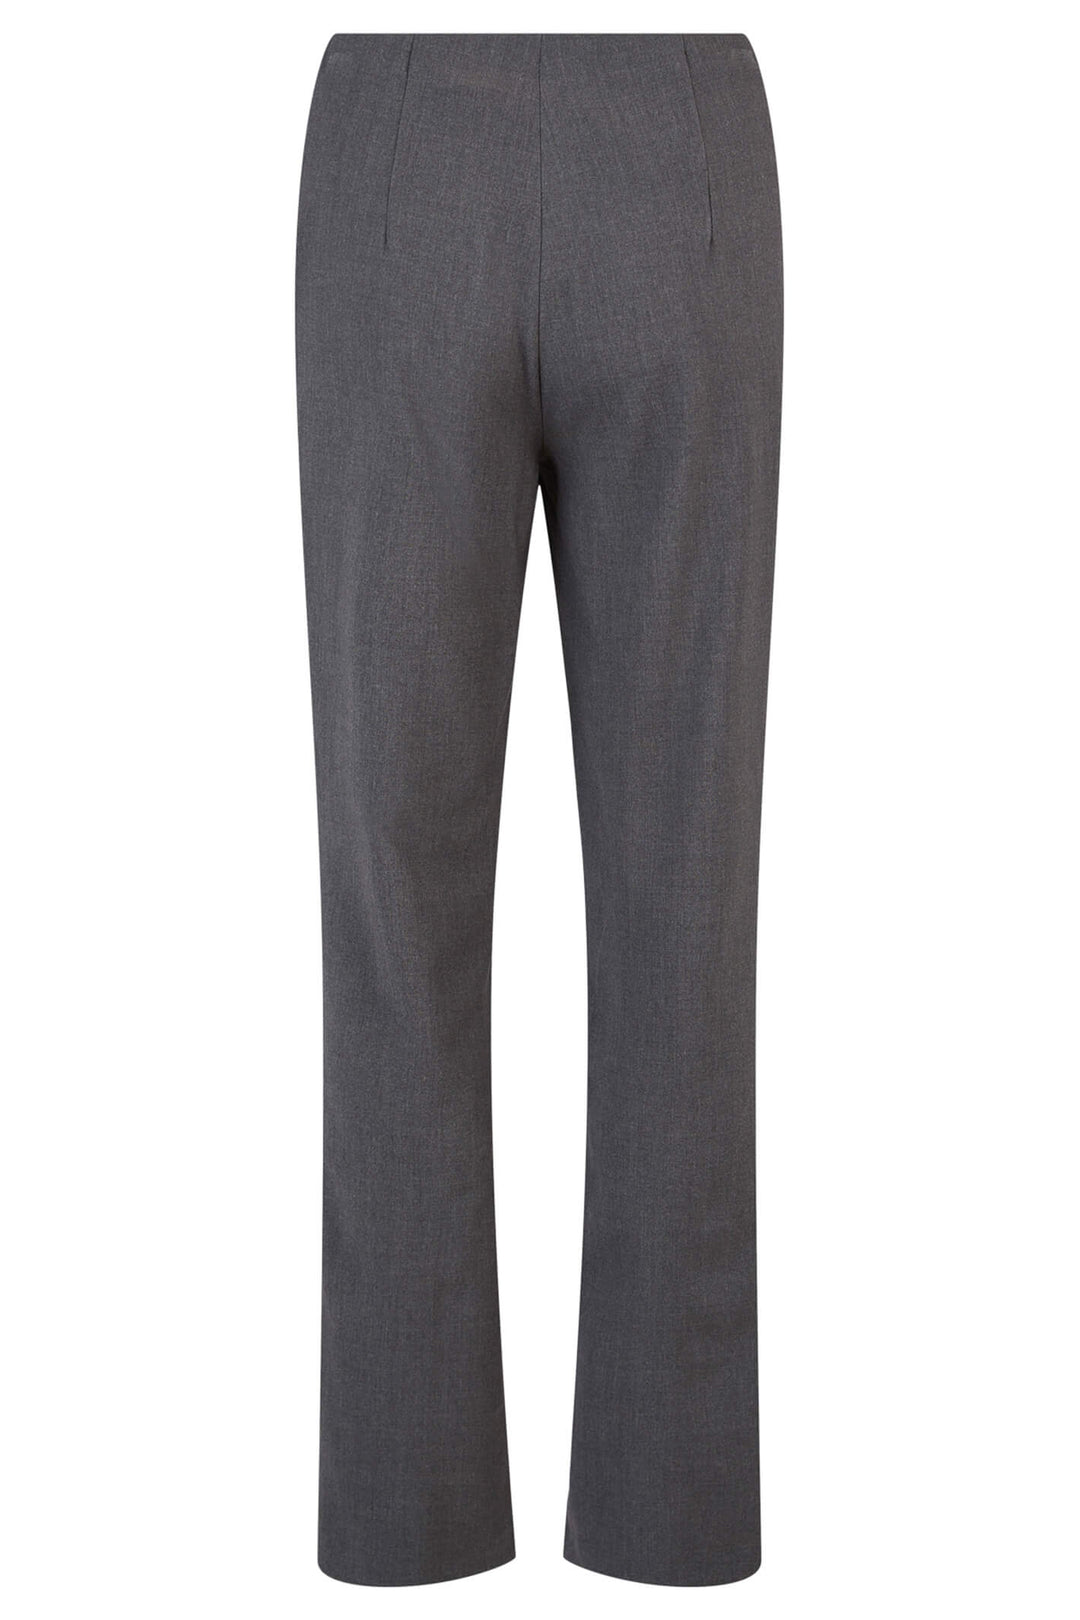 Robell Jacklyn 51408-5689-197 78cm Grey Pull-On Trousers - Shirley Allum Boutique